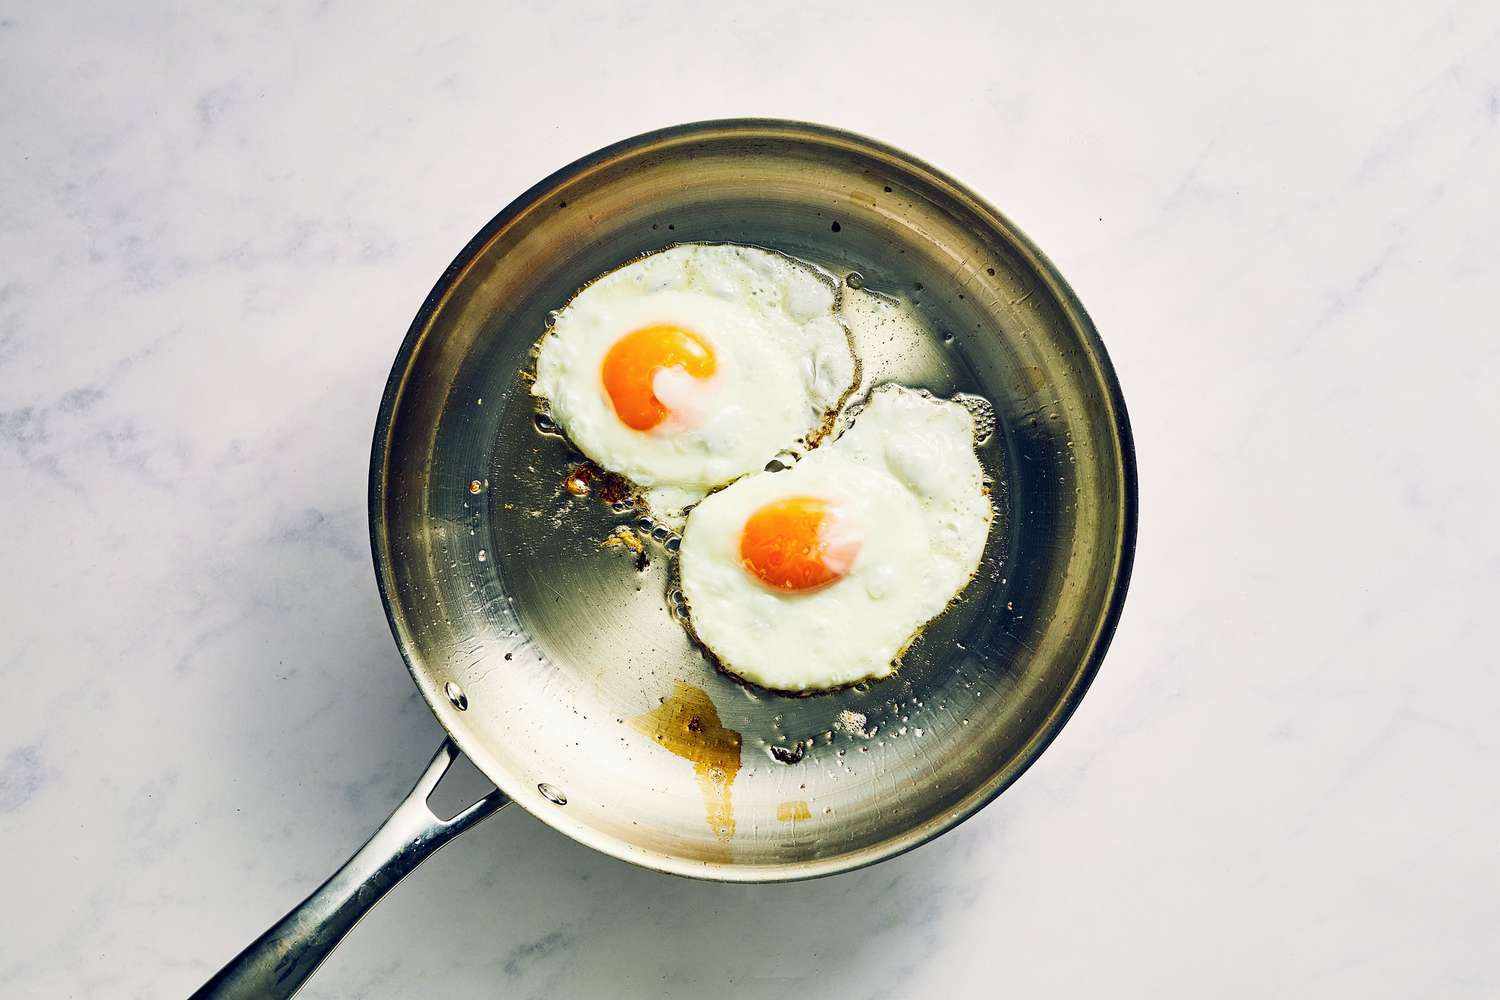 A small skillet with two fried eggs